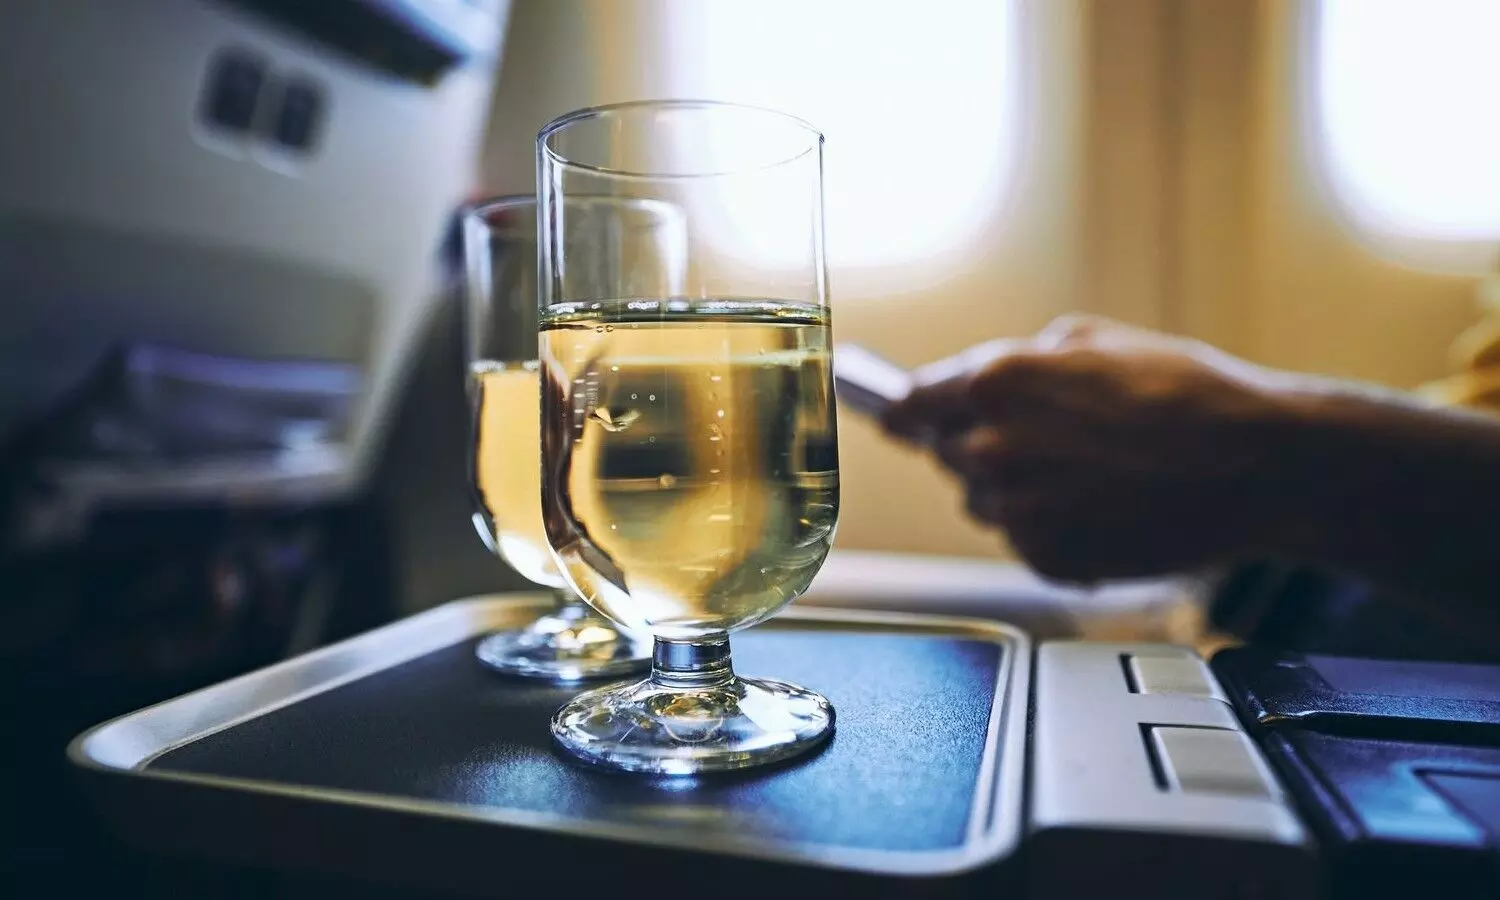 Airlines Liquor Service Policy